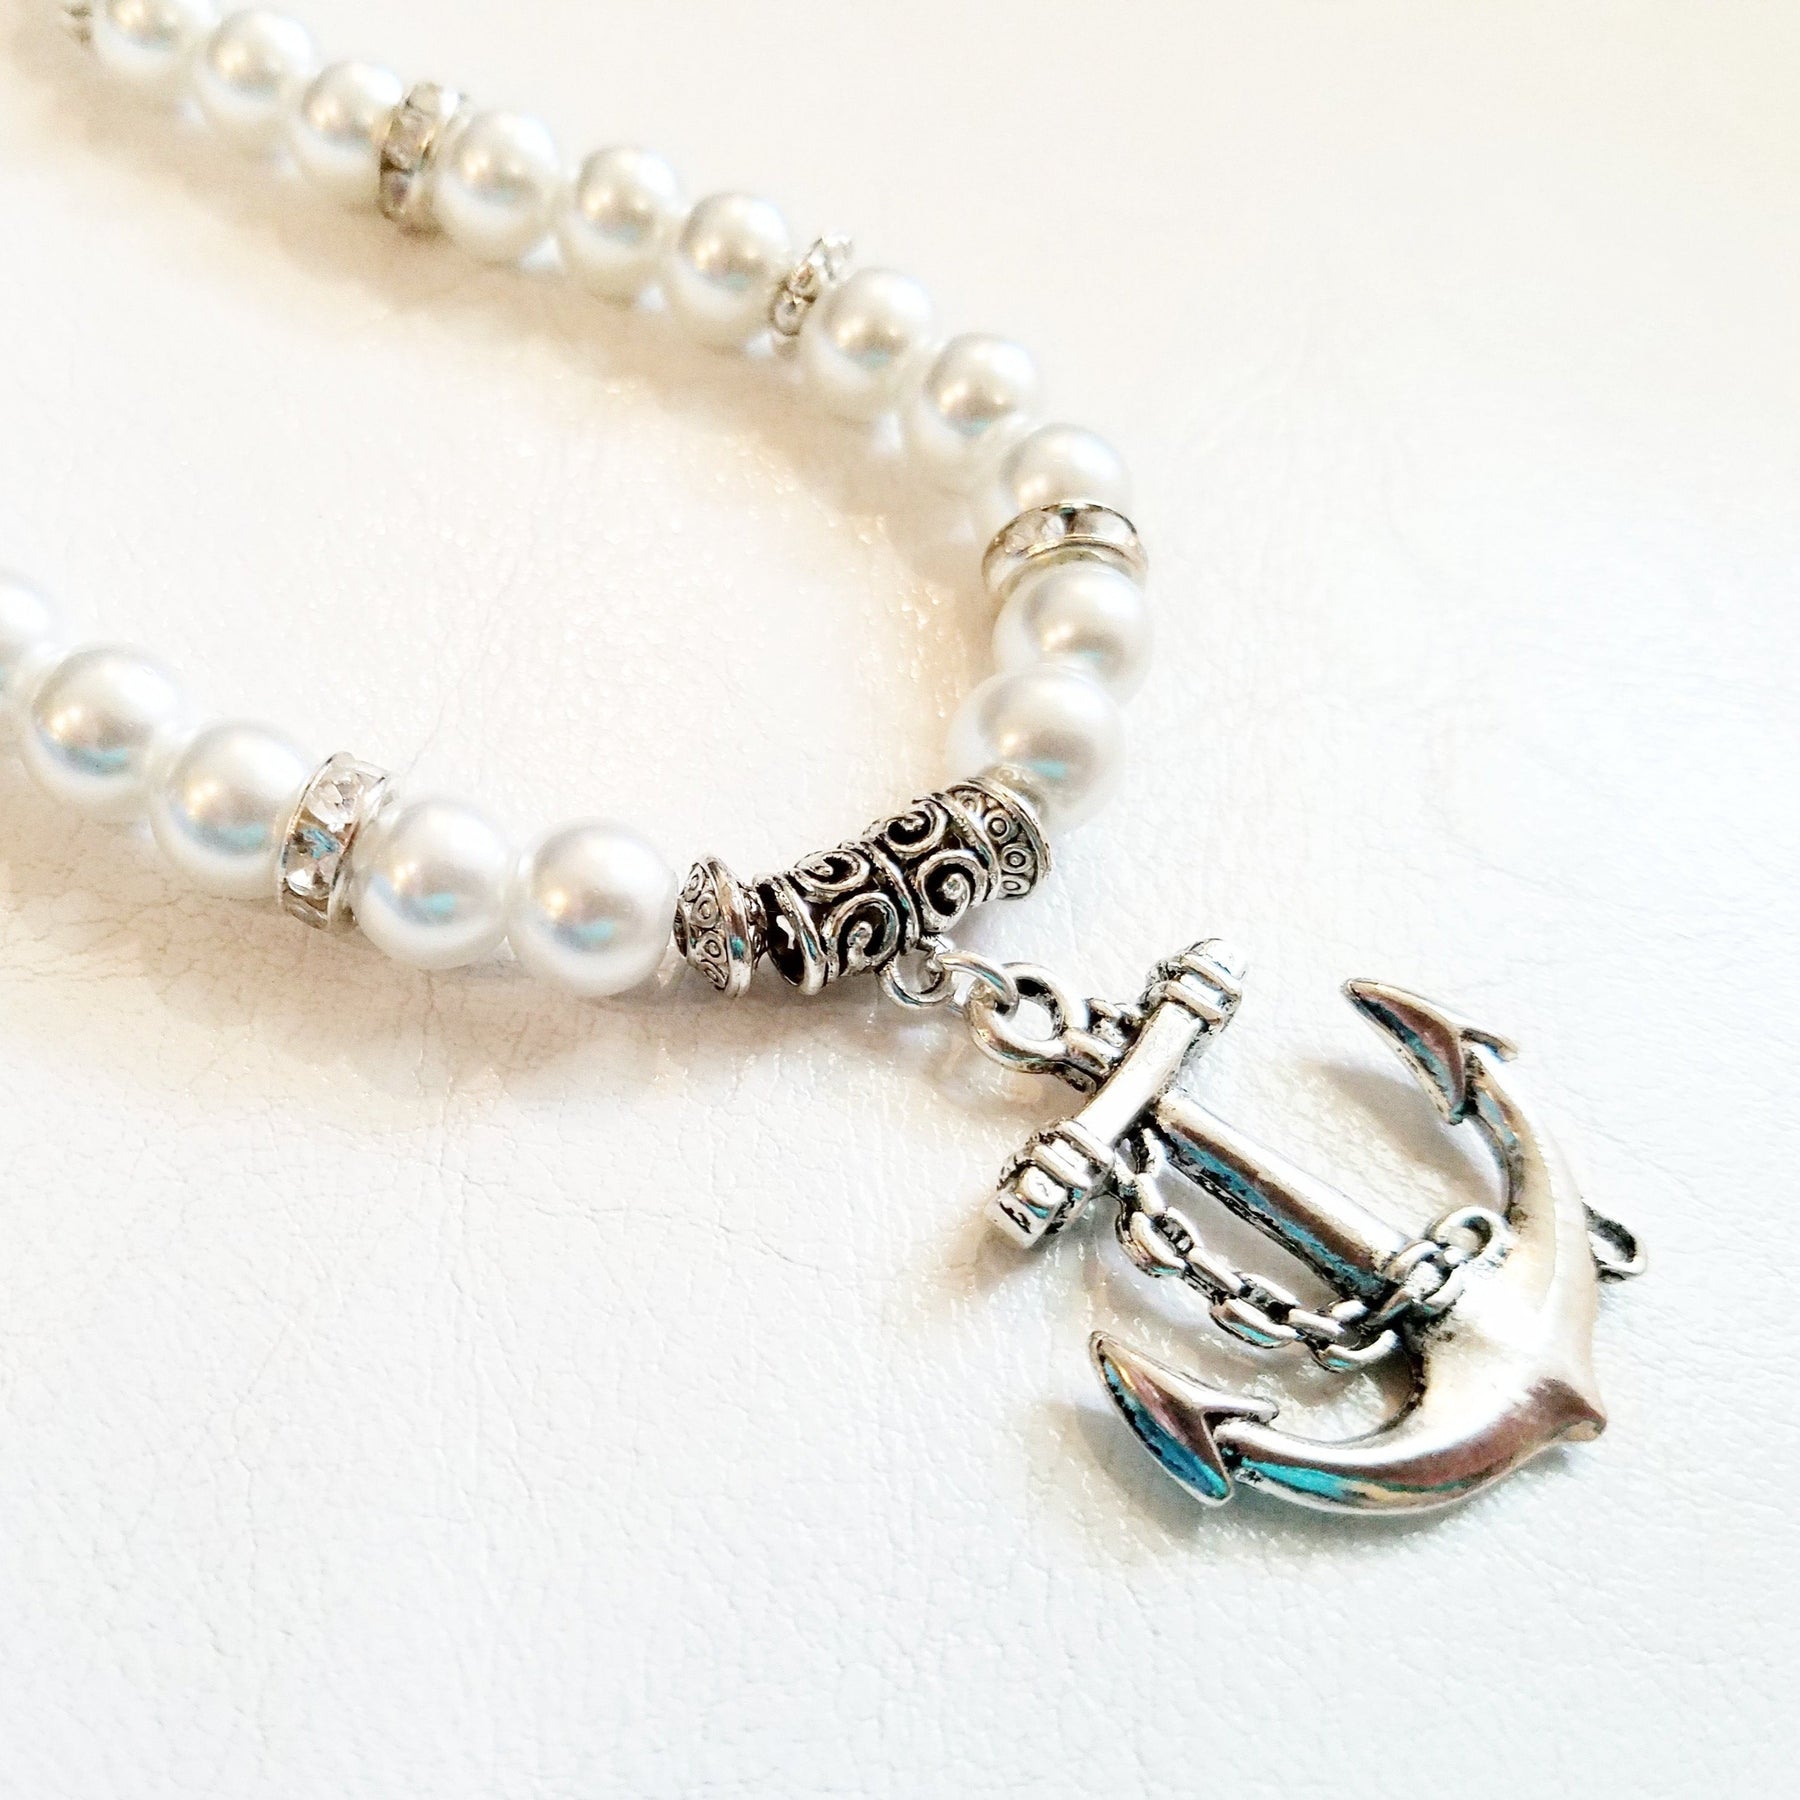 Anchors Away Pearl Necklace